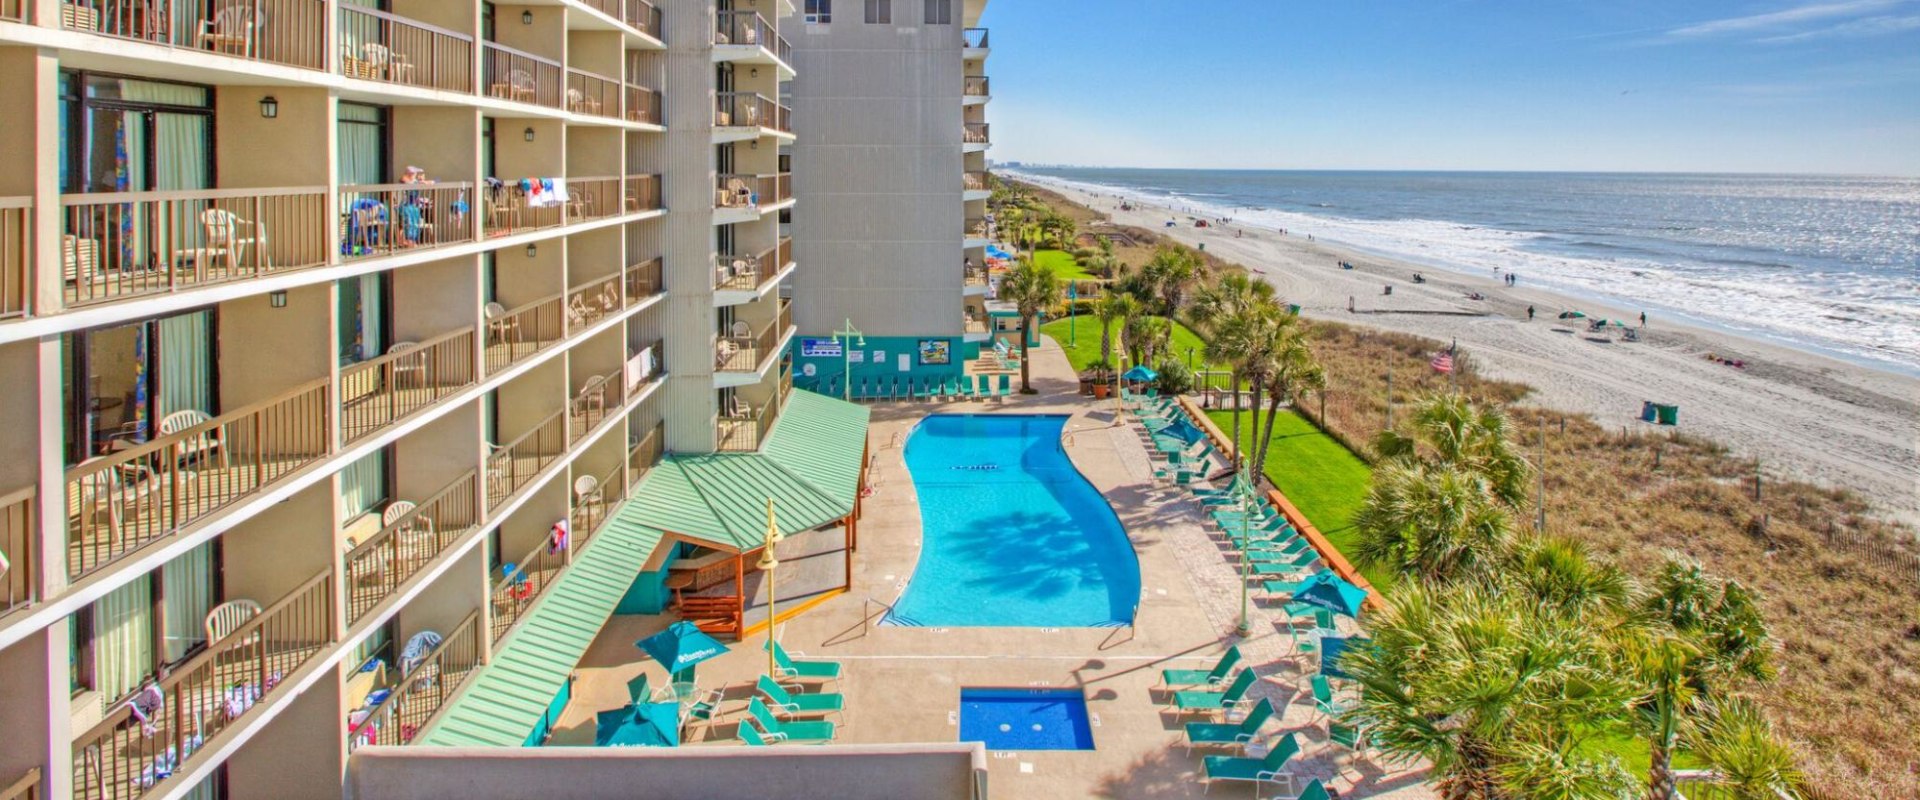 The Best Myrtle Beach Hotels for a Perfect Vacation